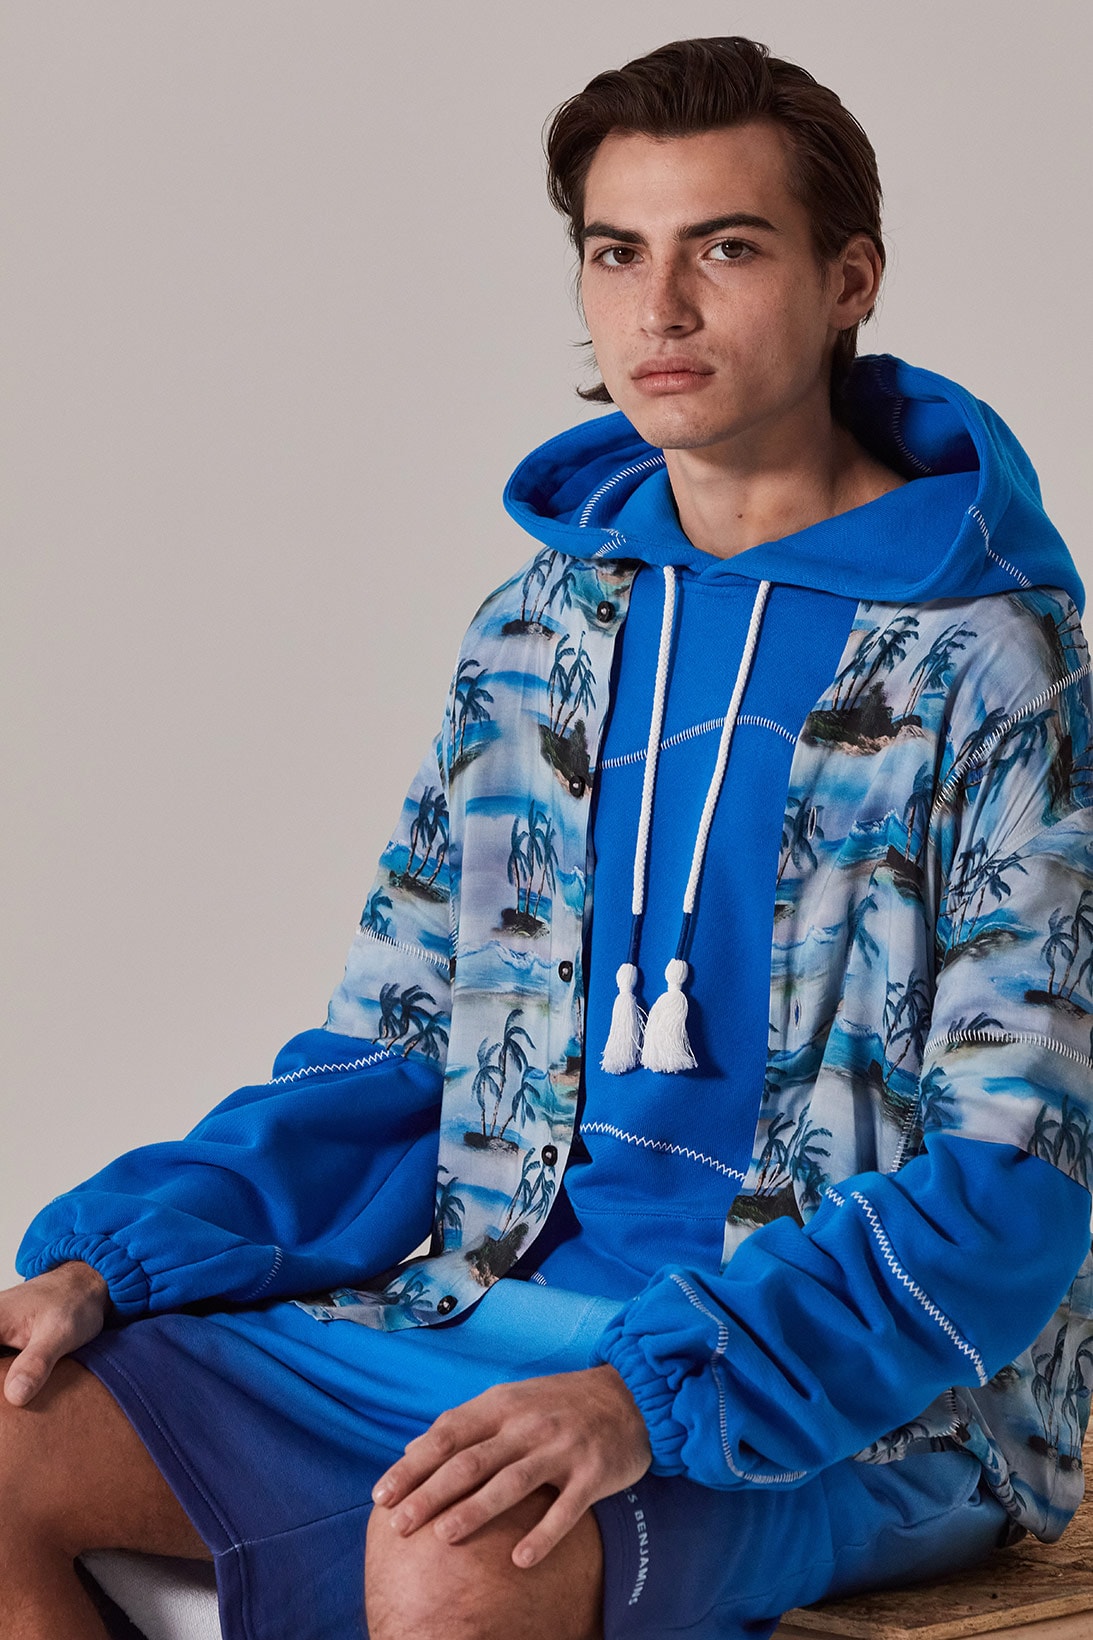 les benjamins silk road services spring summer collection campaign outerwear hoodie jacket shorts